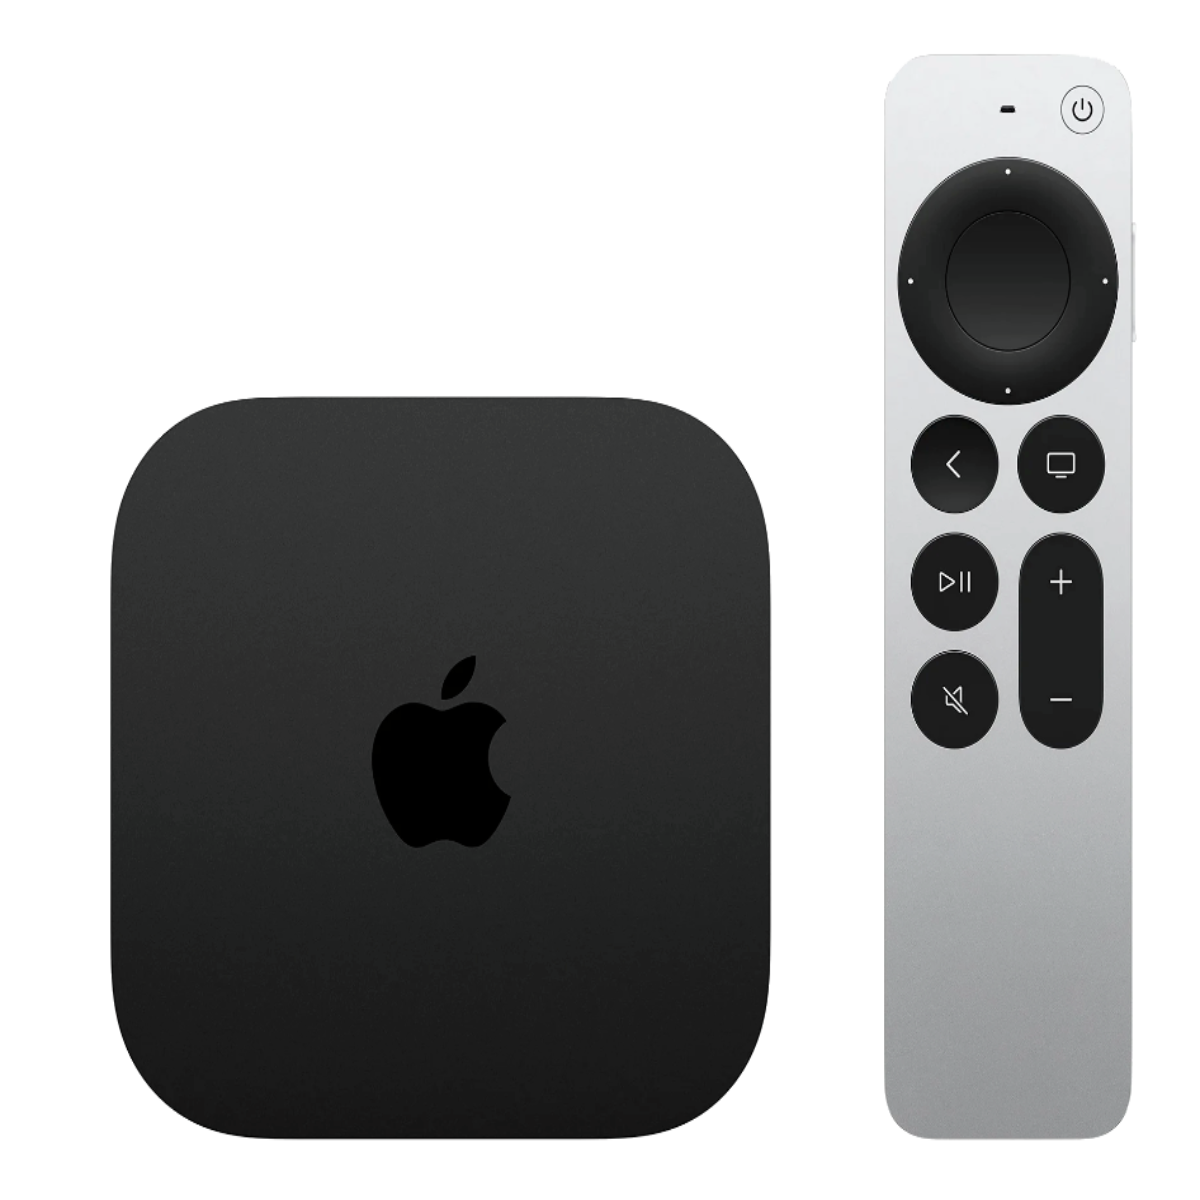 An Apple TV 4K 3rd Gen with Siri remote